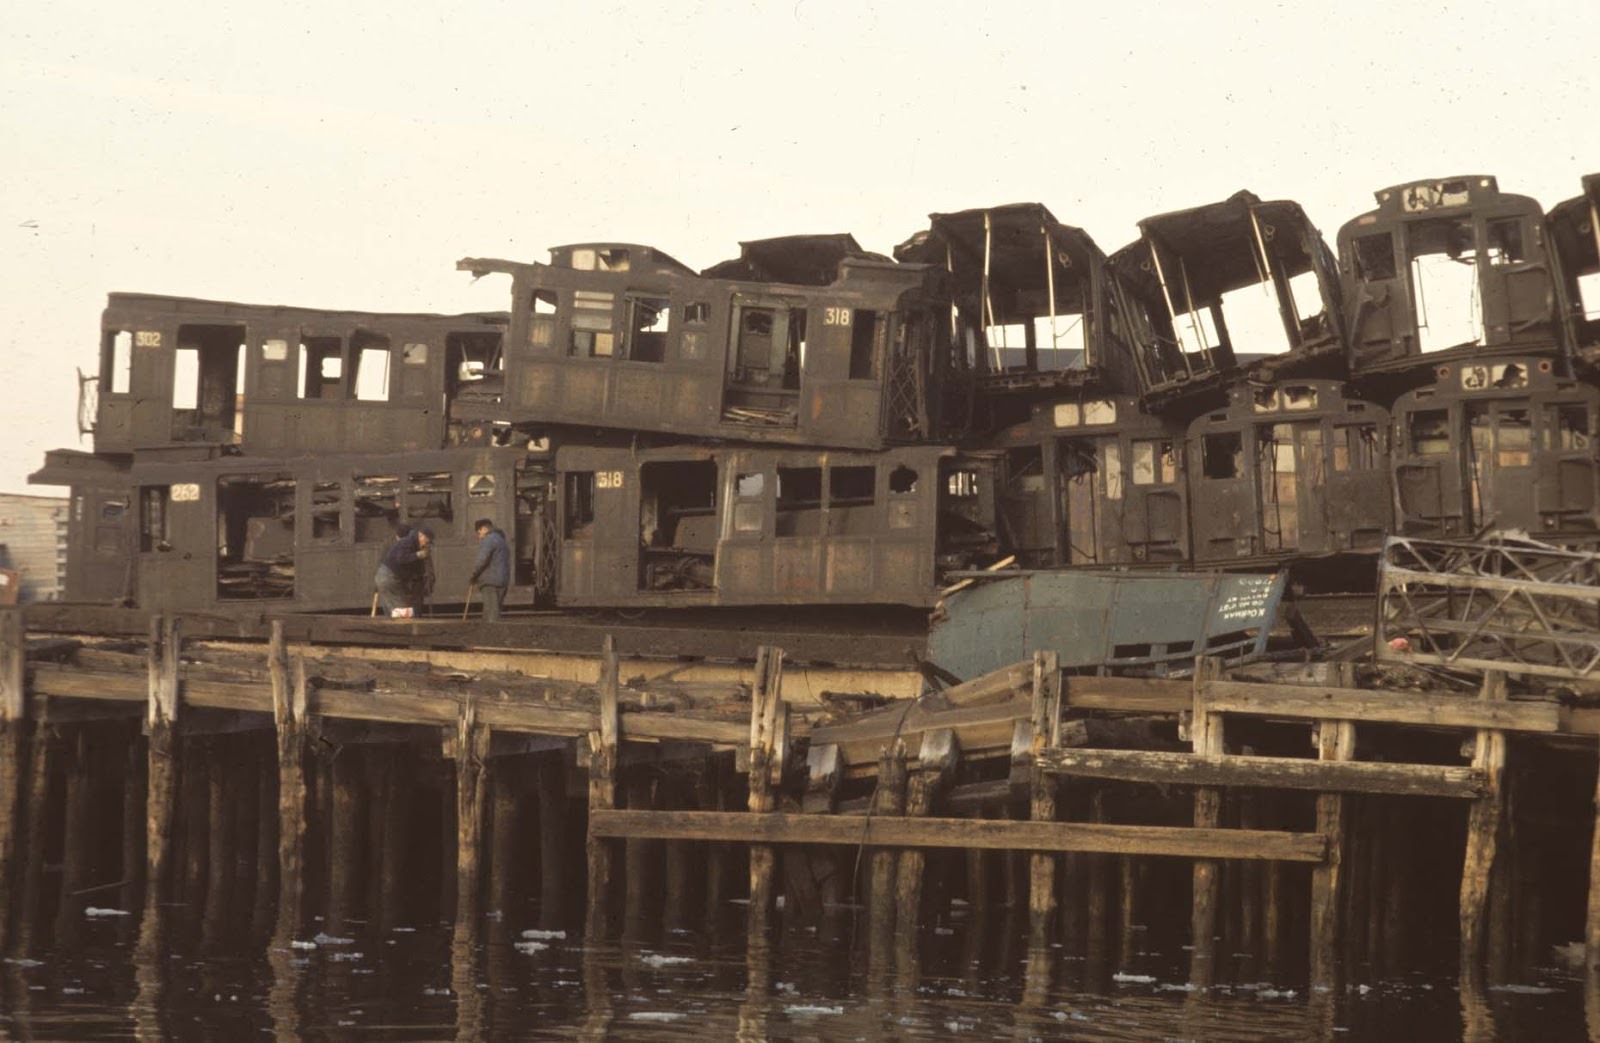 Pier with old subway cars in South Brooklyn, 1970.